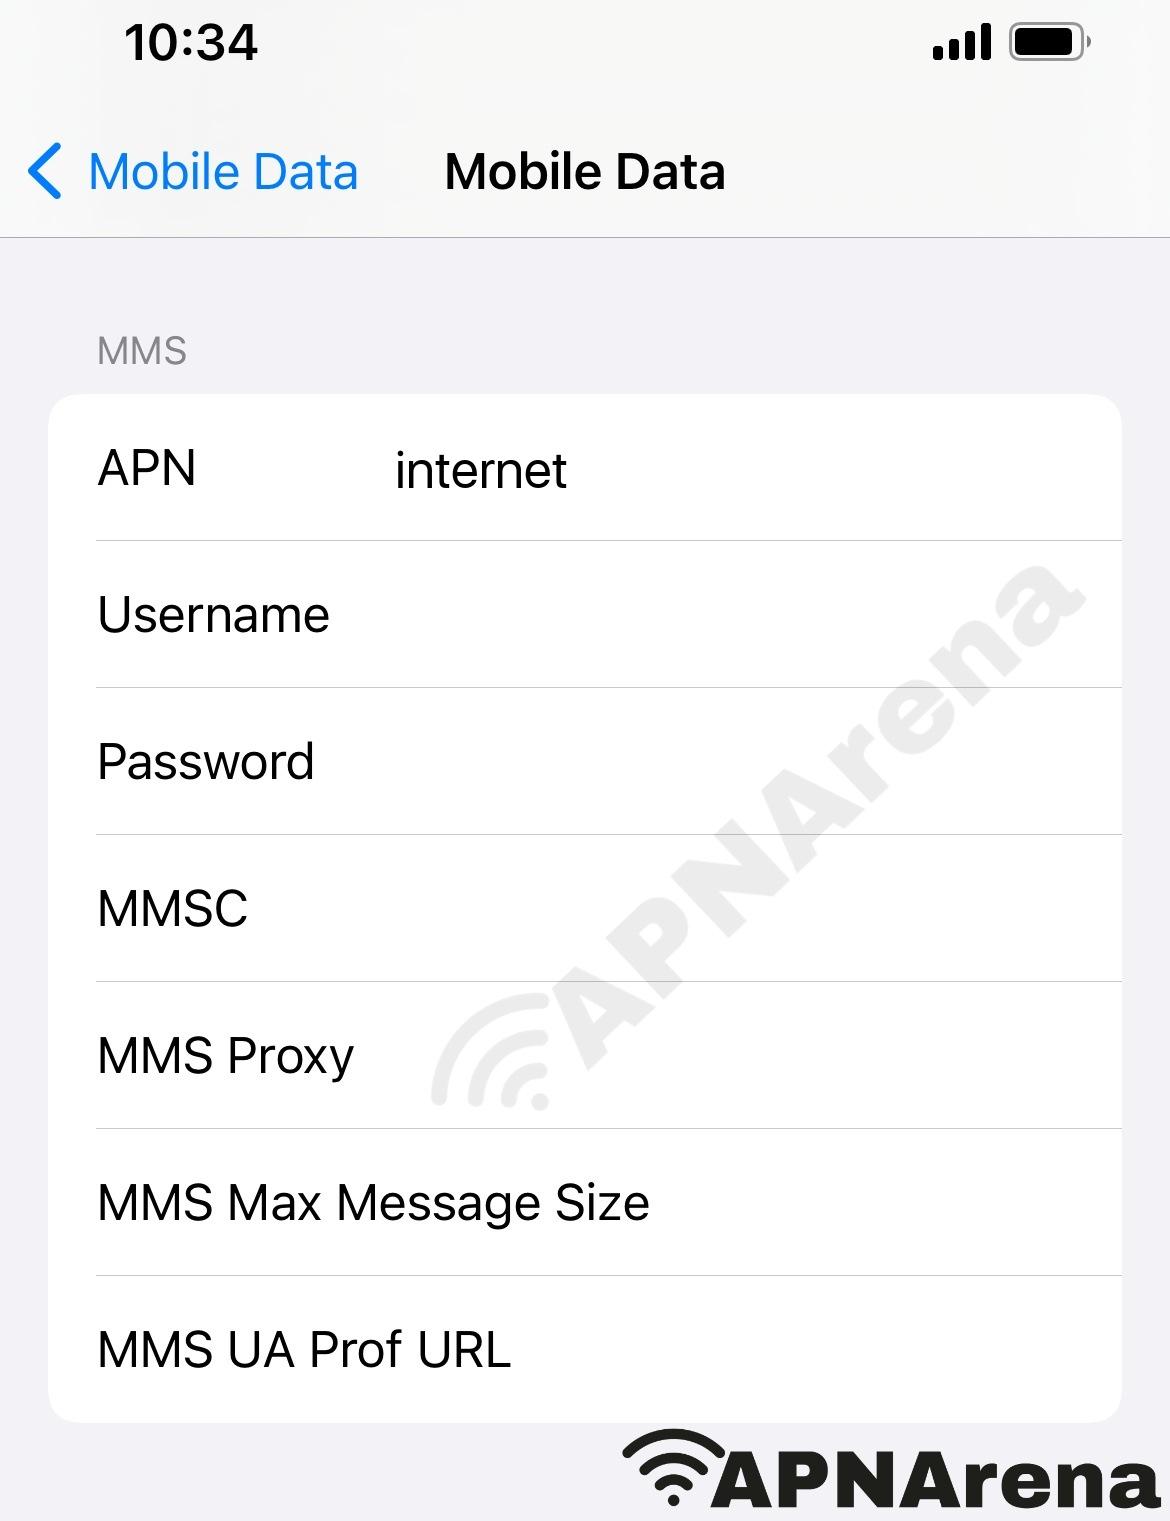 Firefly Mobile MMS Settings for iPhone